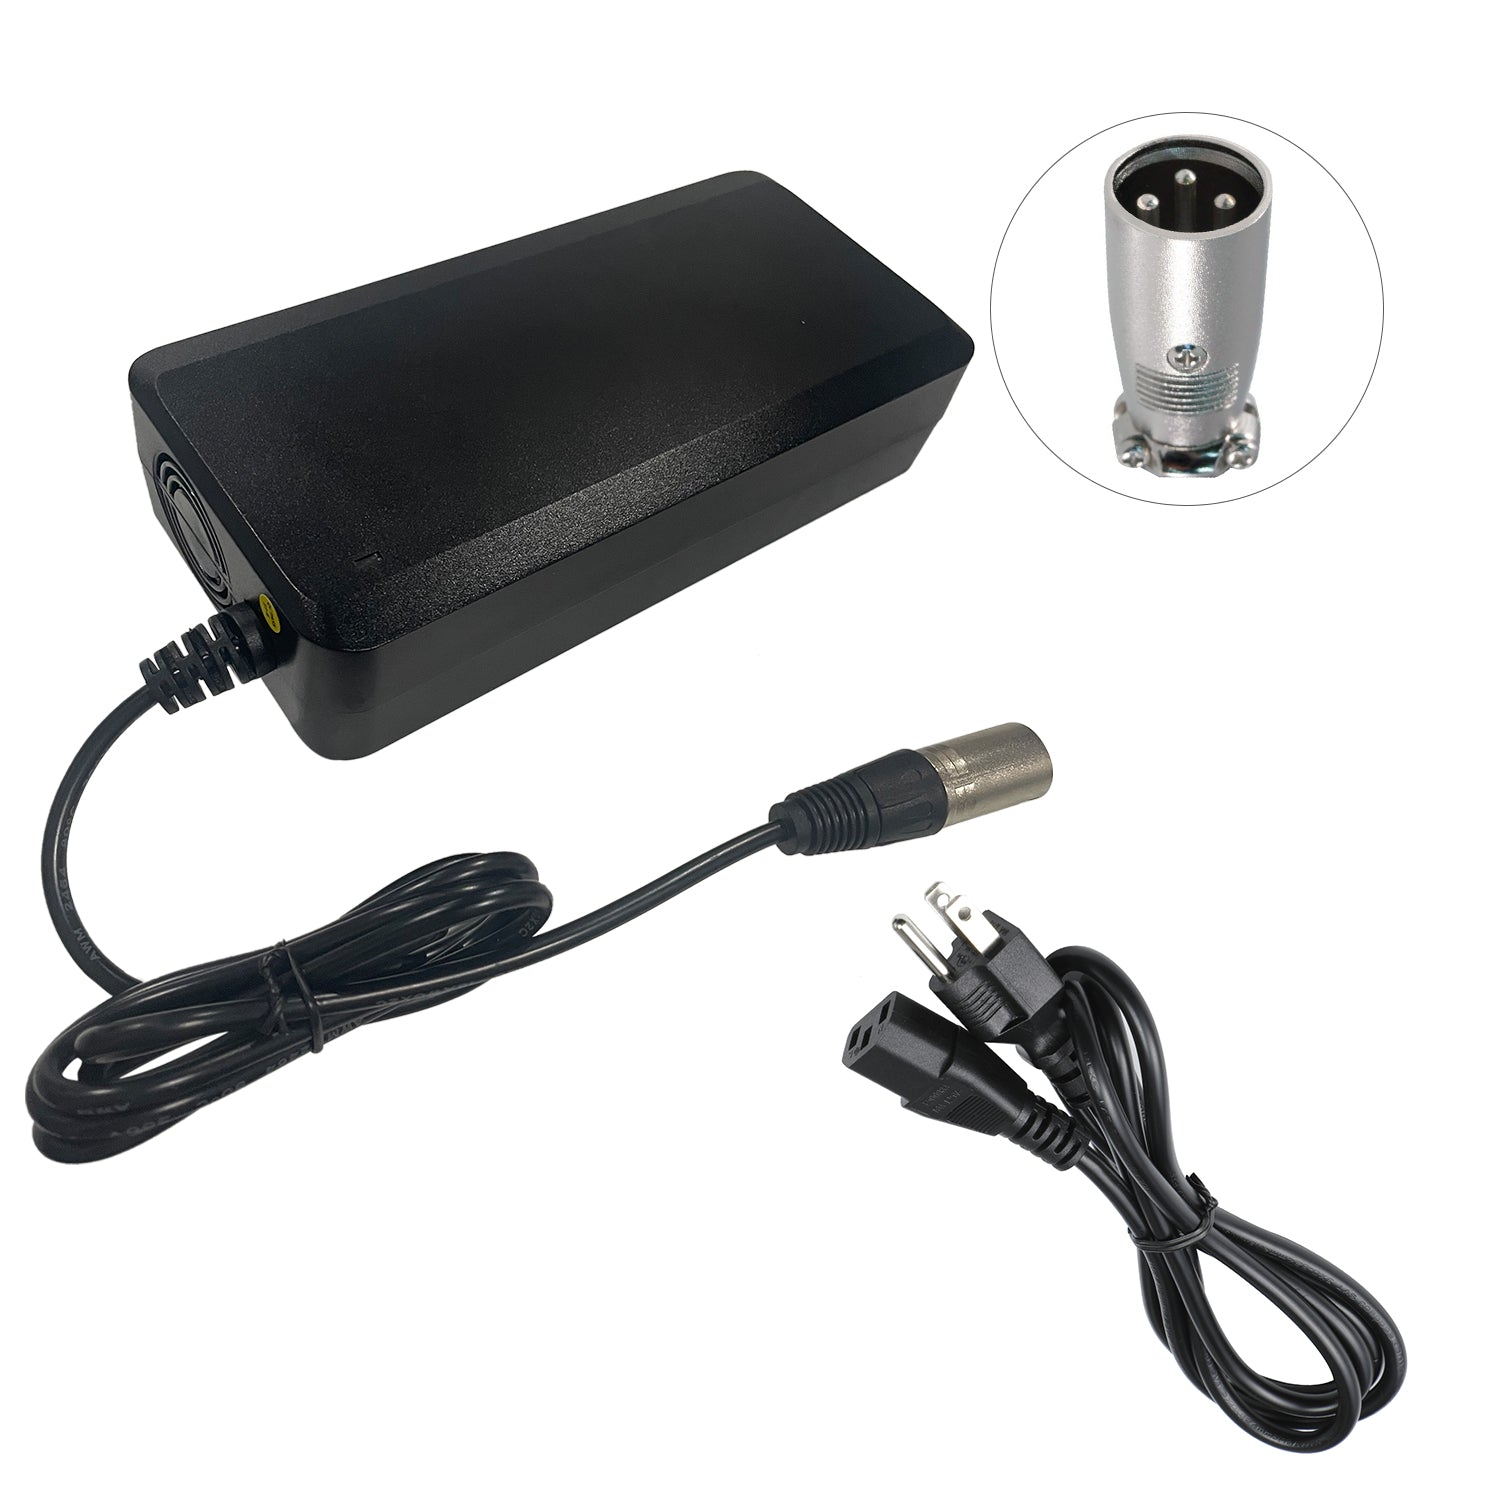 UL Listed 24V 8A Charger for Jazzy Series Scooters